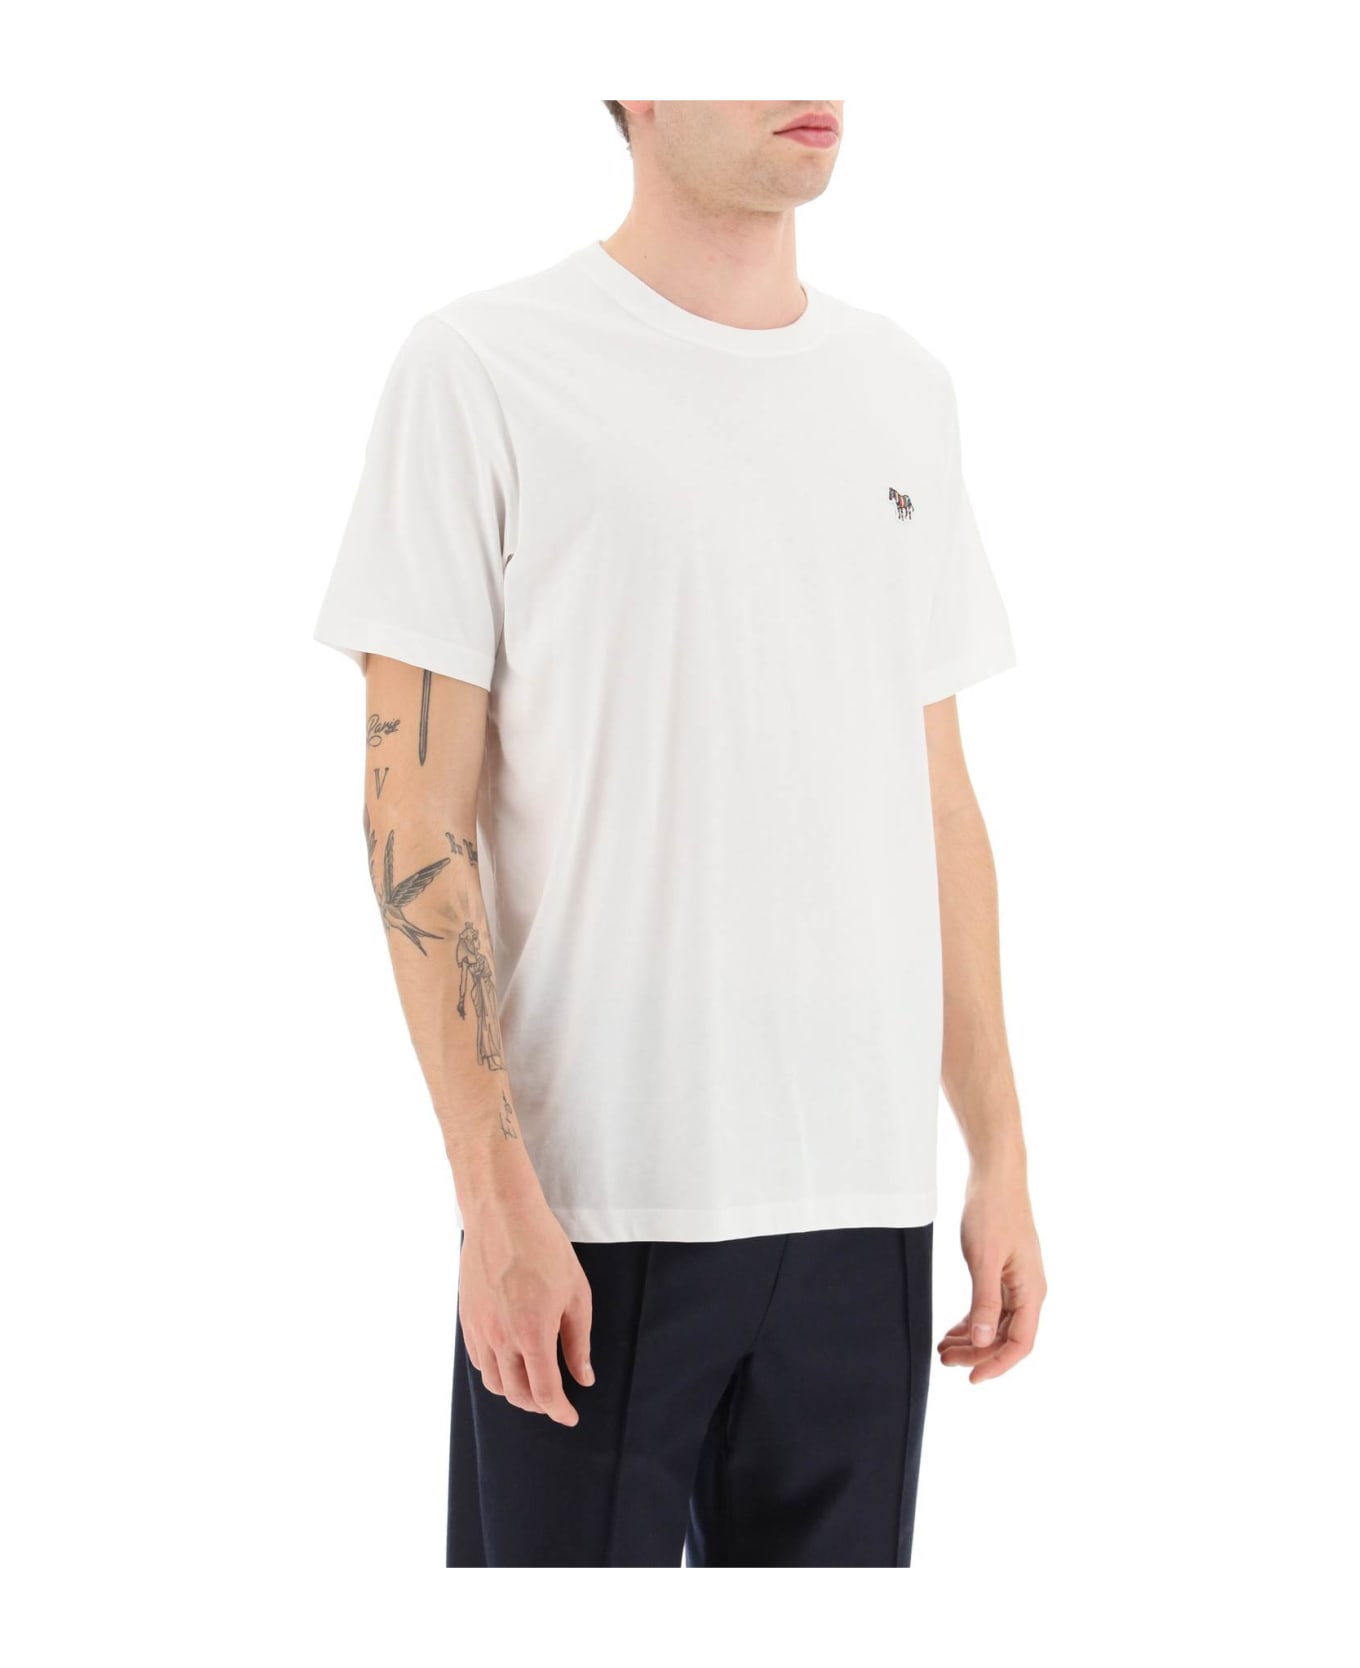 PS by Paul Smith Zebra Patch T-shirt - WHITE (White) シャツ